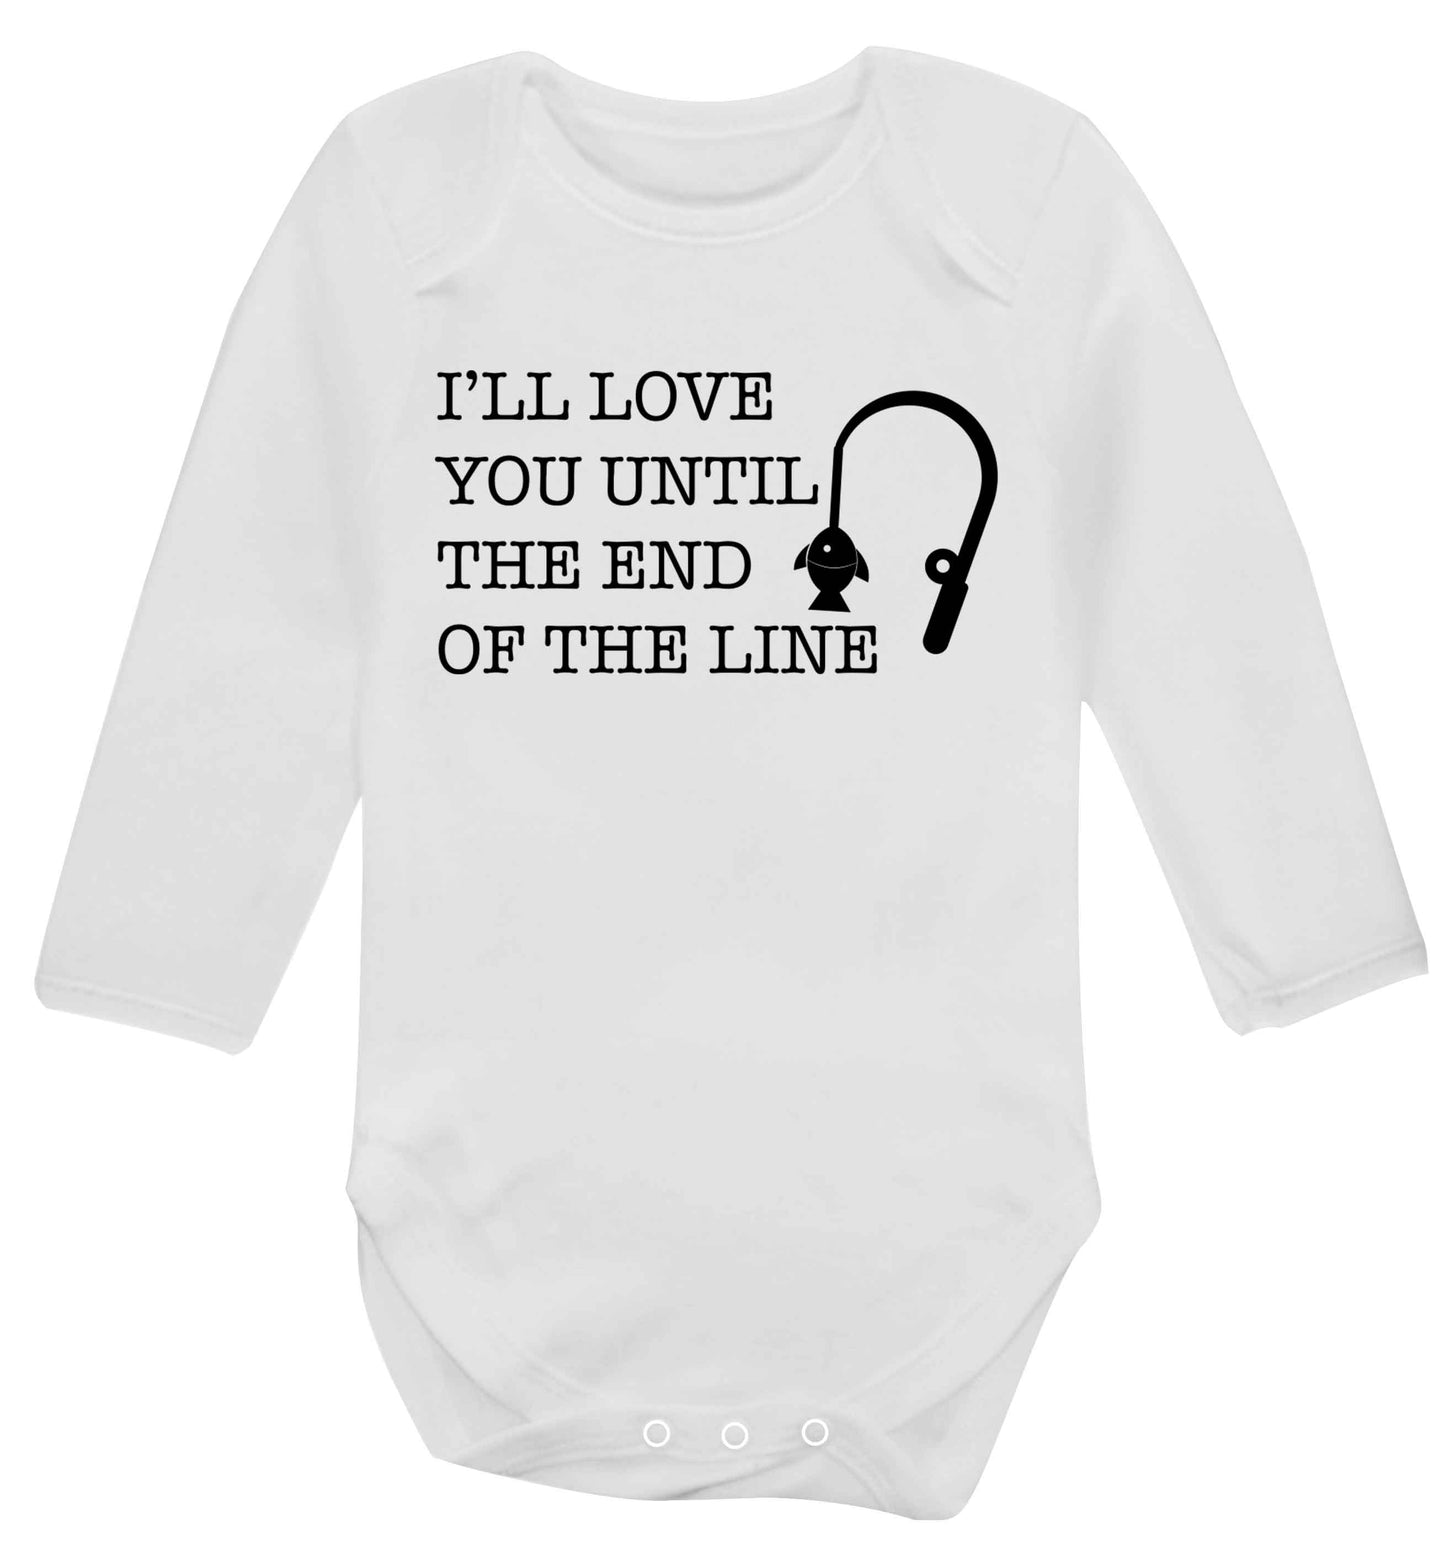 I'll love you until the end of the line Baby Vest long sleeved white 6-12 months